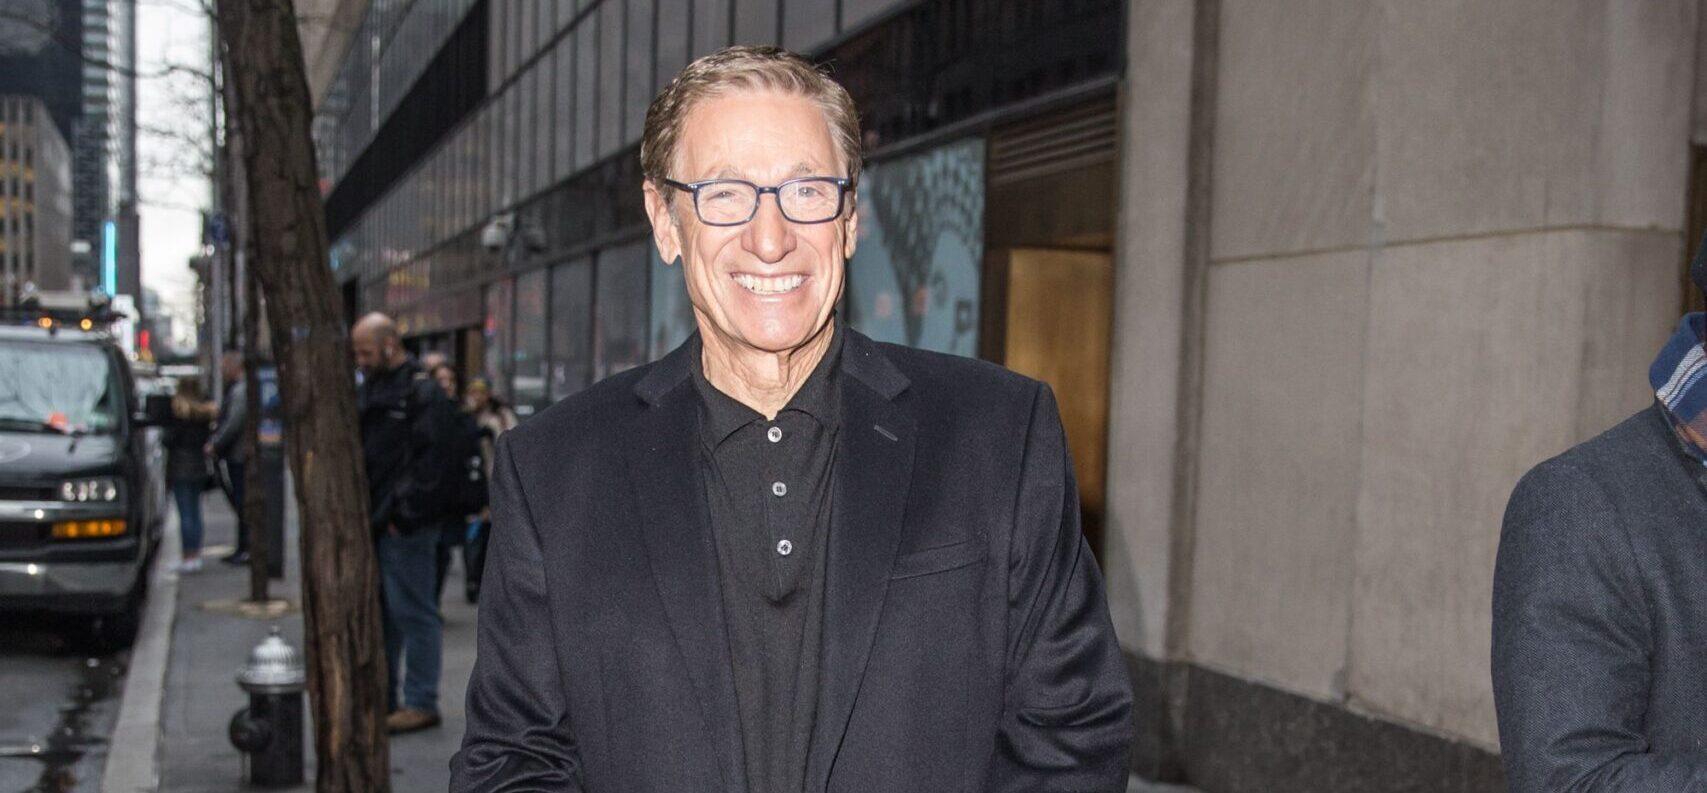 Maury Povich is seen leaving the Today Show